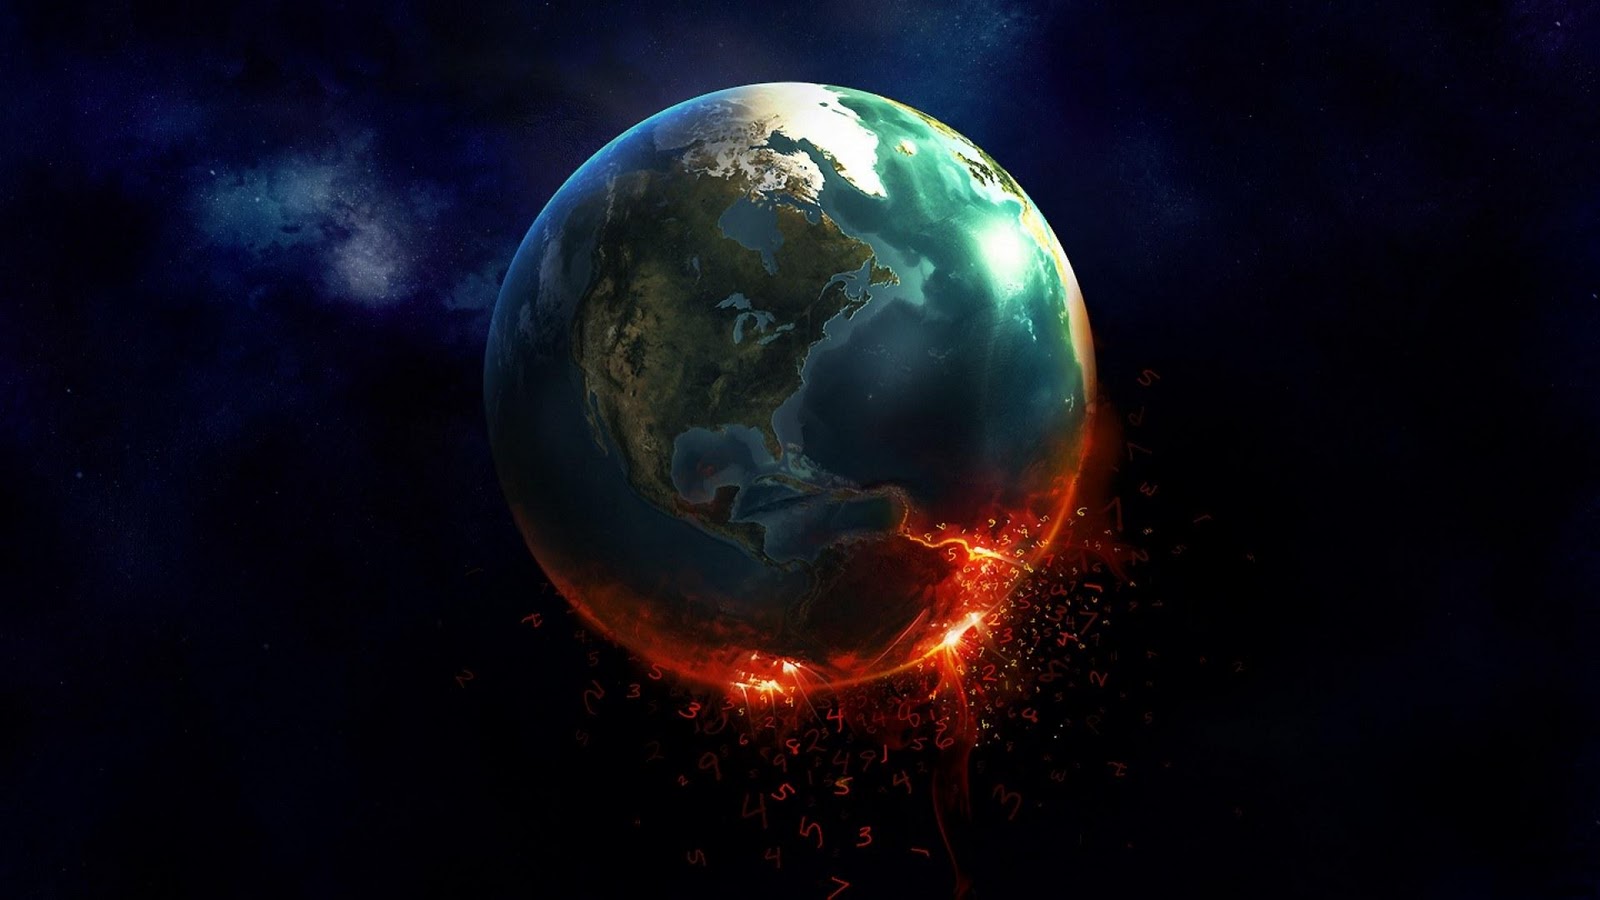 End Of The World Wallpaper Hd Hd wallpaper 2012 end of world